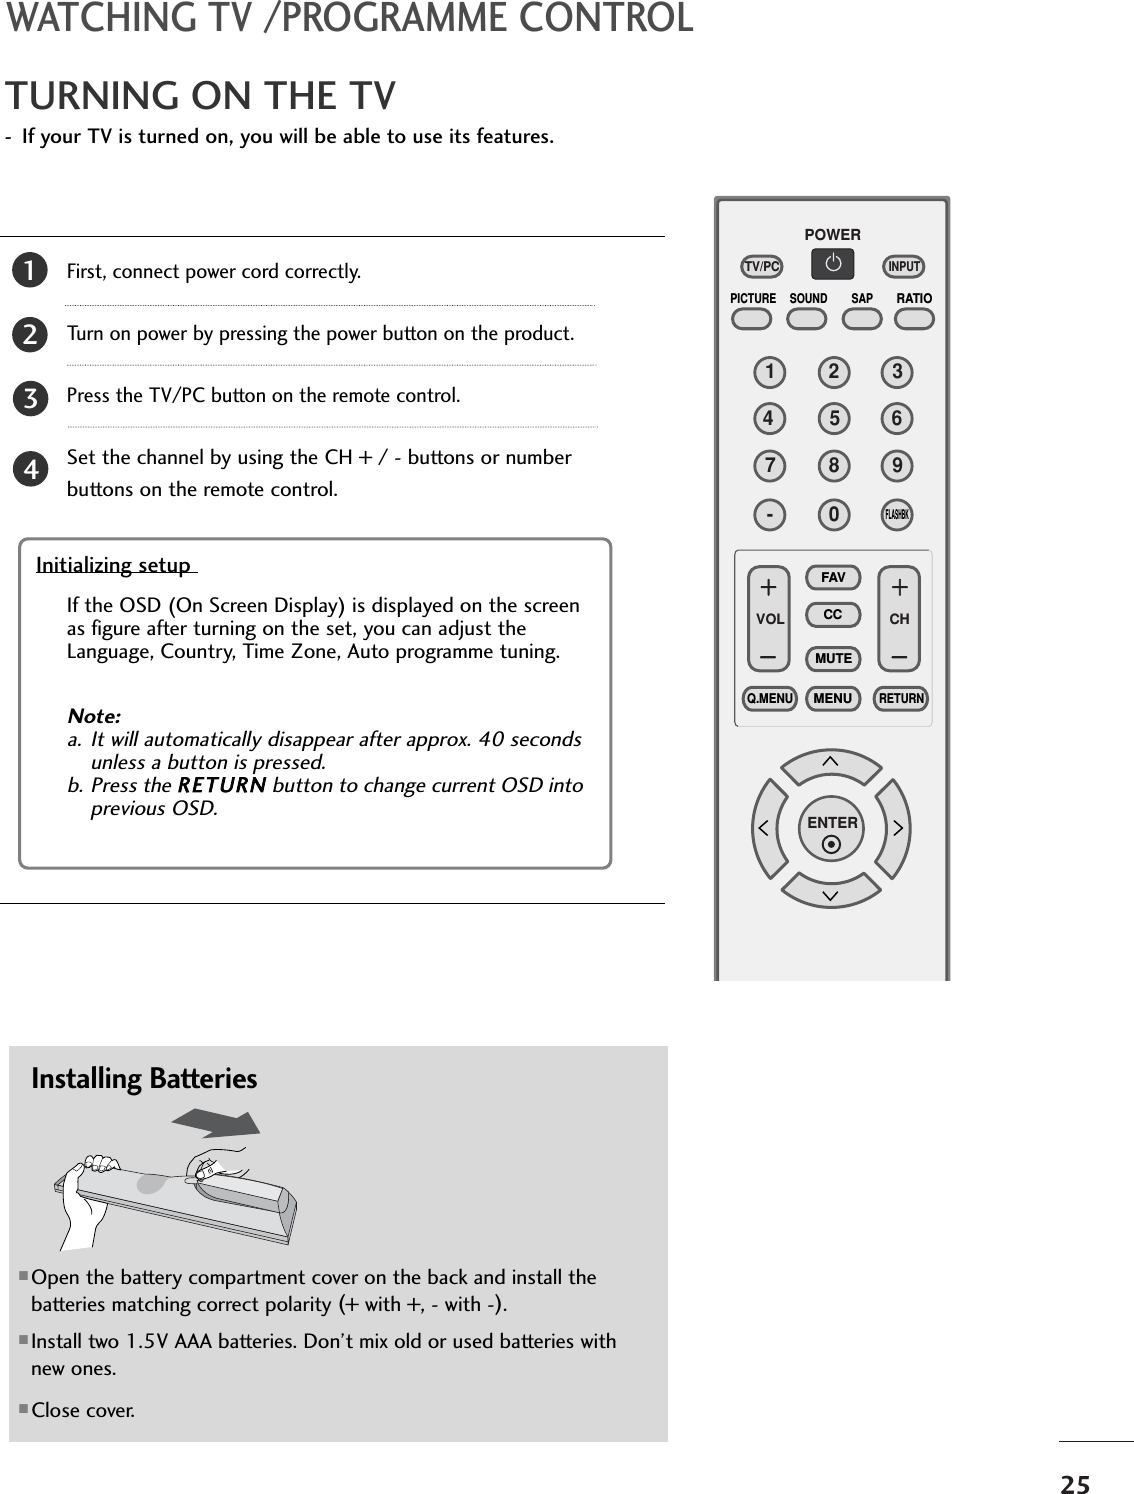 25TURNING ON THE TV- If your TV is turned on, you will be able to use its features.WATCHING TV /PROGRAMME CONTROLFirst, connect power cord correctly. Turn on power by pressing the power button on the product.Press the TV/PC button on the remote control.Set the channel by using the CH + / - buttons or numberbuttons on the remote control. 21123456780-9VOL CHENTERPOWERMUTEQ.MENUMENUFLASHBKRETURNCCFAVPICTURE SOUND SAPRATIOTV/PCINPUTInitializing setup Note: a. It will automatically disappear after approx. 40 secondsunless a button is pressed.b. Press the RETURN button to change current OSD intoprevious OSD.If the OSD (On Screen Display) is displayed on the screenas figure after turning on the set, you can adjust theLanguage, Country, Time Zone, Auto programme tuning.43Installing Batteries■Open the battery compartment cover on the back and install thebatteries matching correct polarity (+ with +, - with -).■Install two 1.5V AAA batteries. Don’t mix old or used batteries withnew ones.■Close cover.